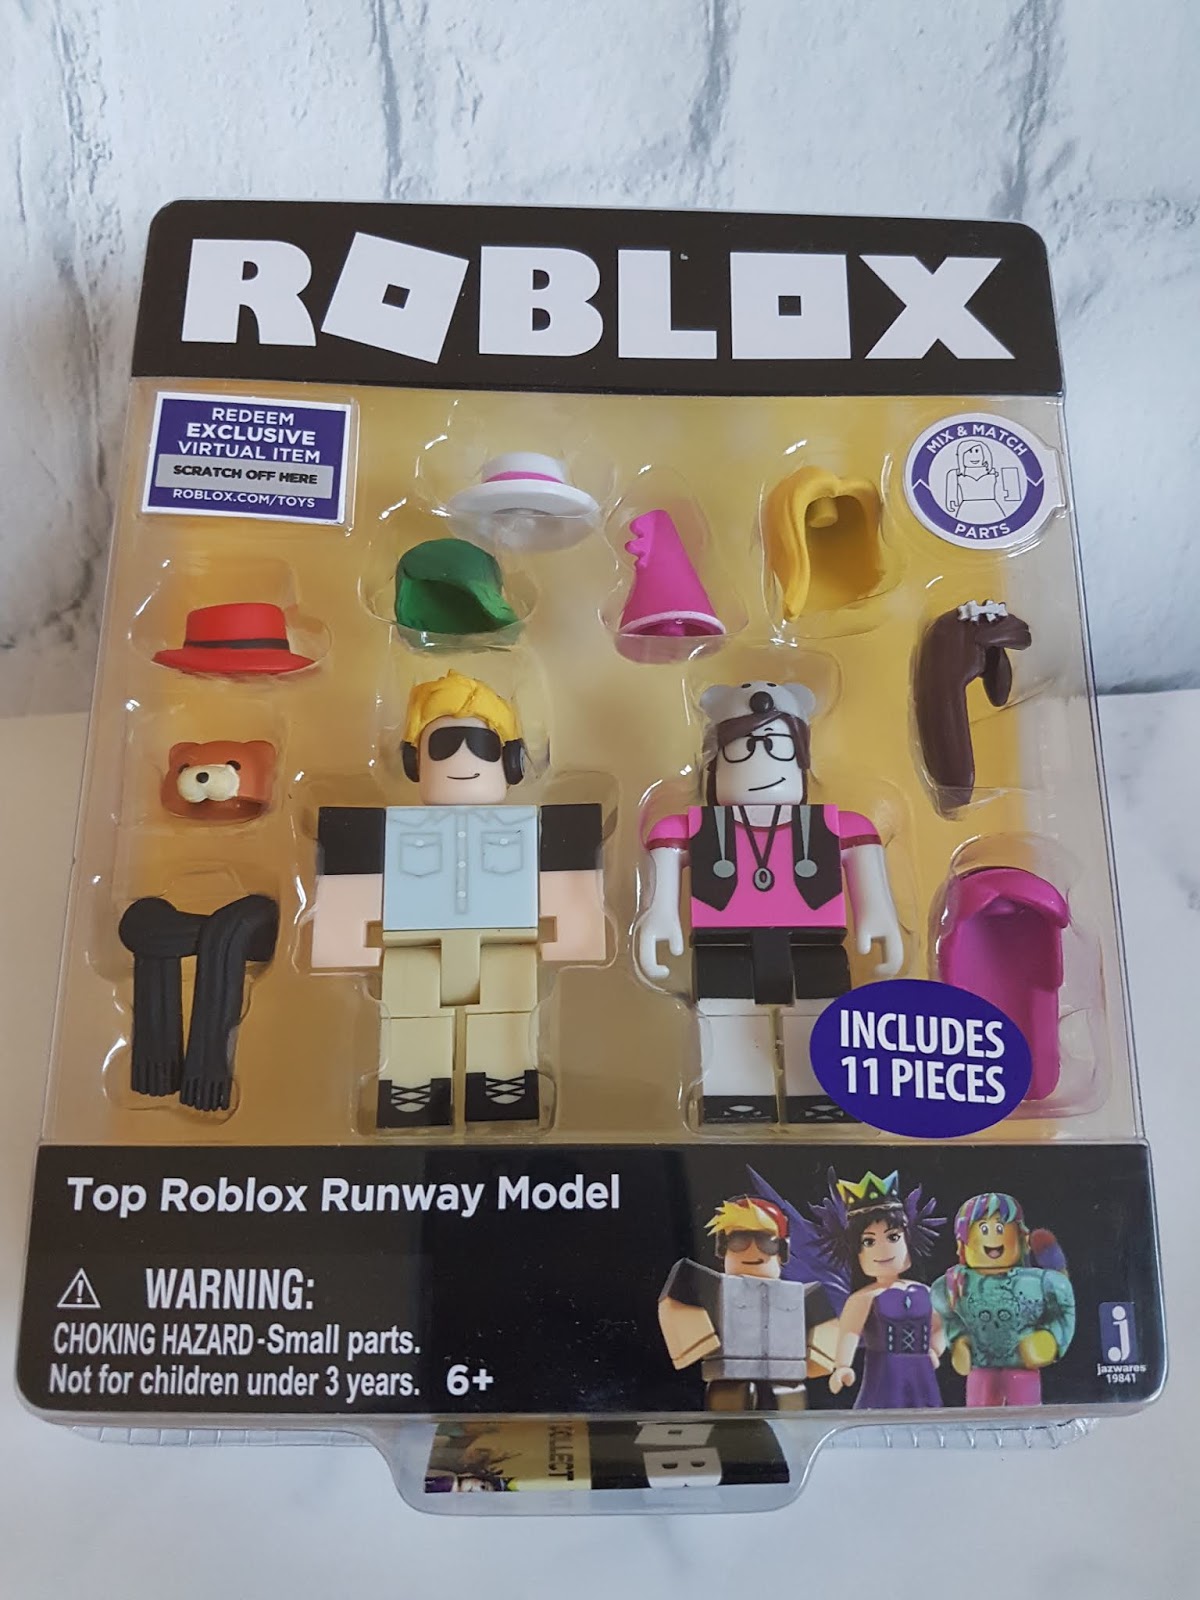 Mummy Of 3 Diaries Roblox Celebrity Series 1 Review - roblox series 1 celebrity